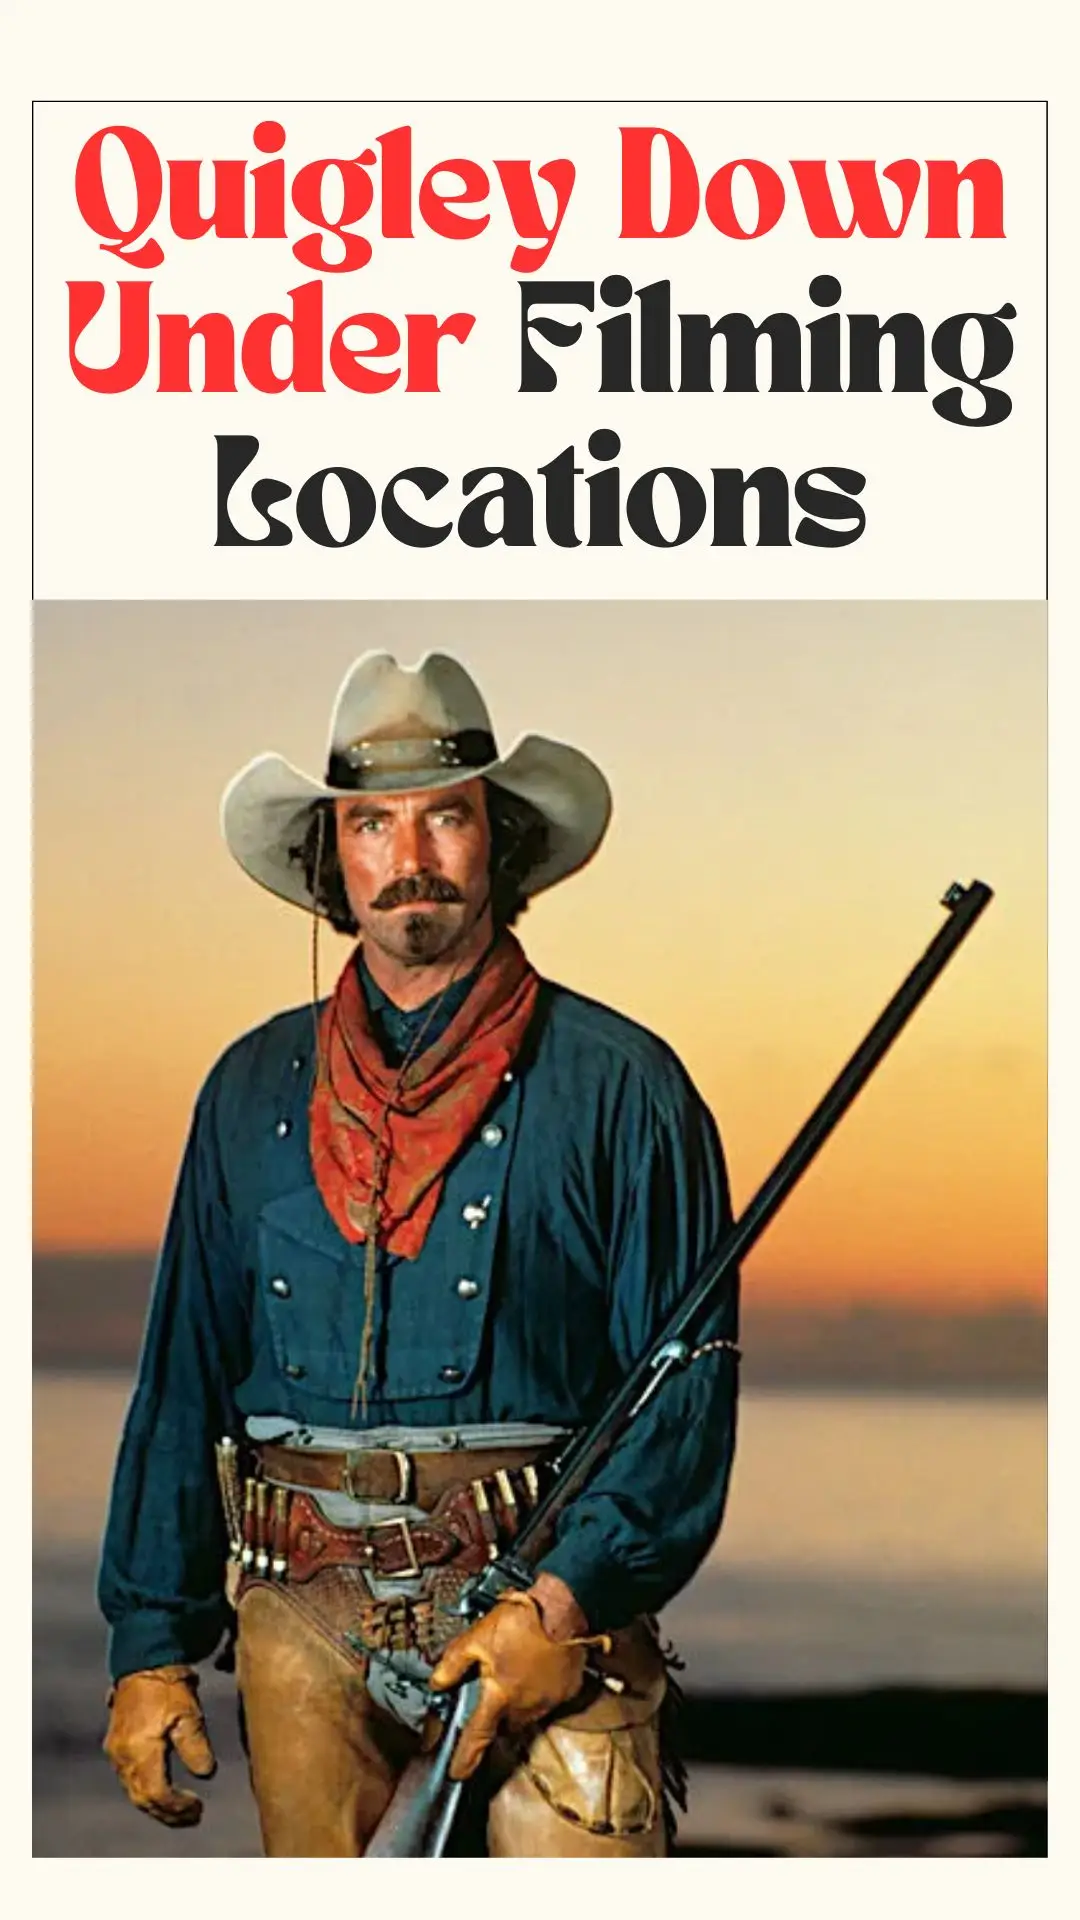 Quigley Down Under Filming Locations